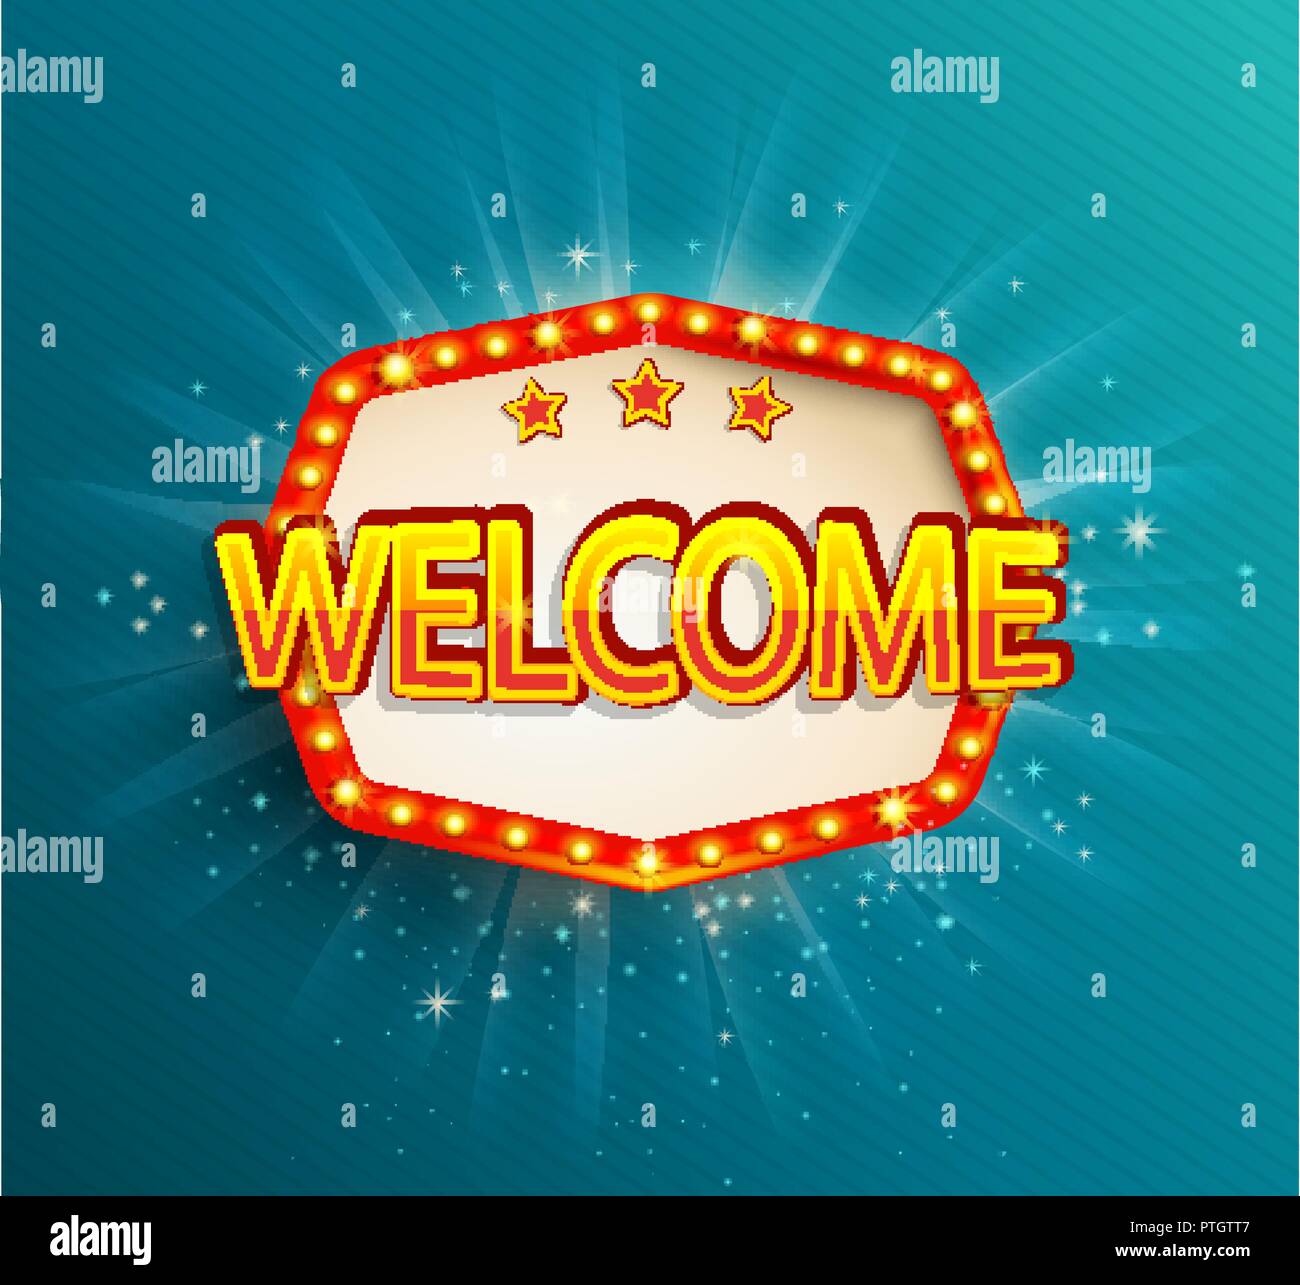 The welcome retro banner with glowing lamps. Vector illustration with shining lights frame in vintage style. Greetings to casino, gambling, cinema, new city for travelers. Stock Vector